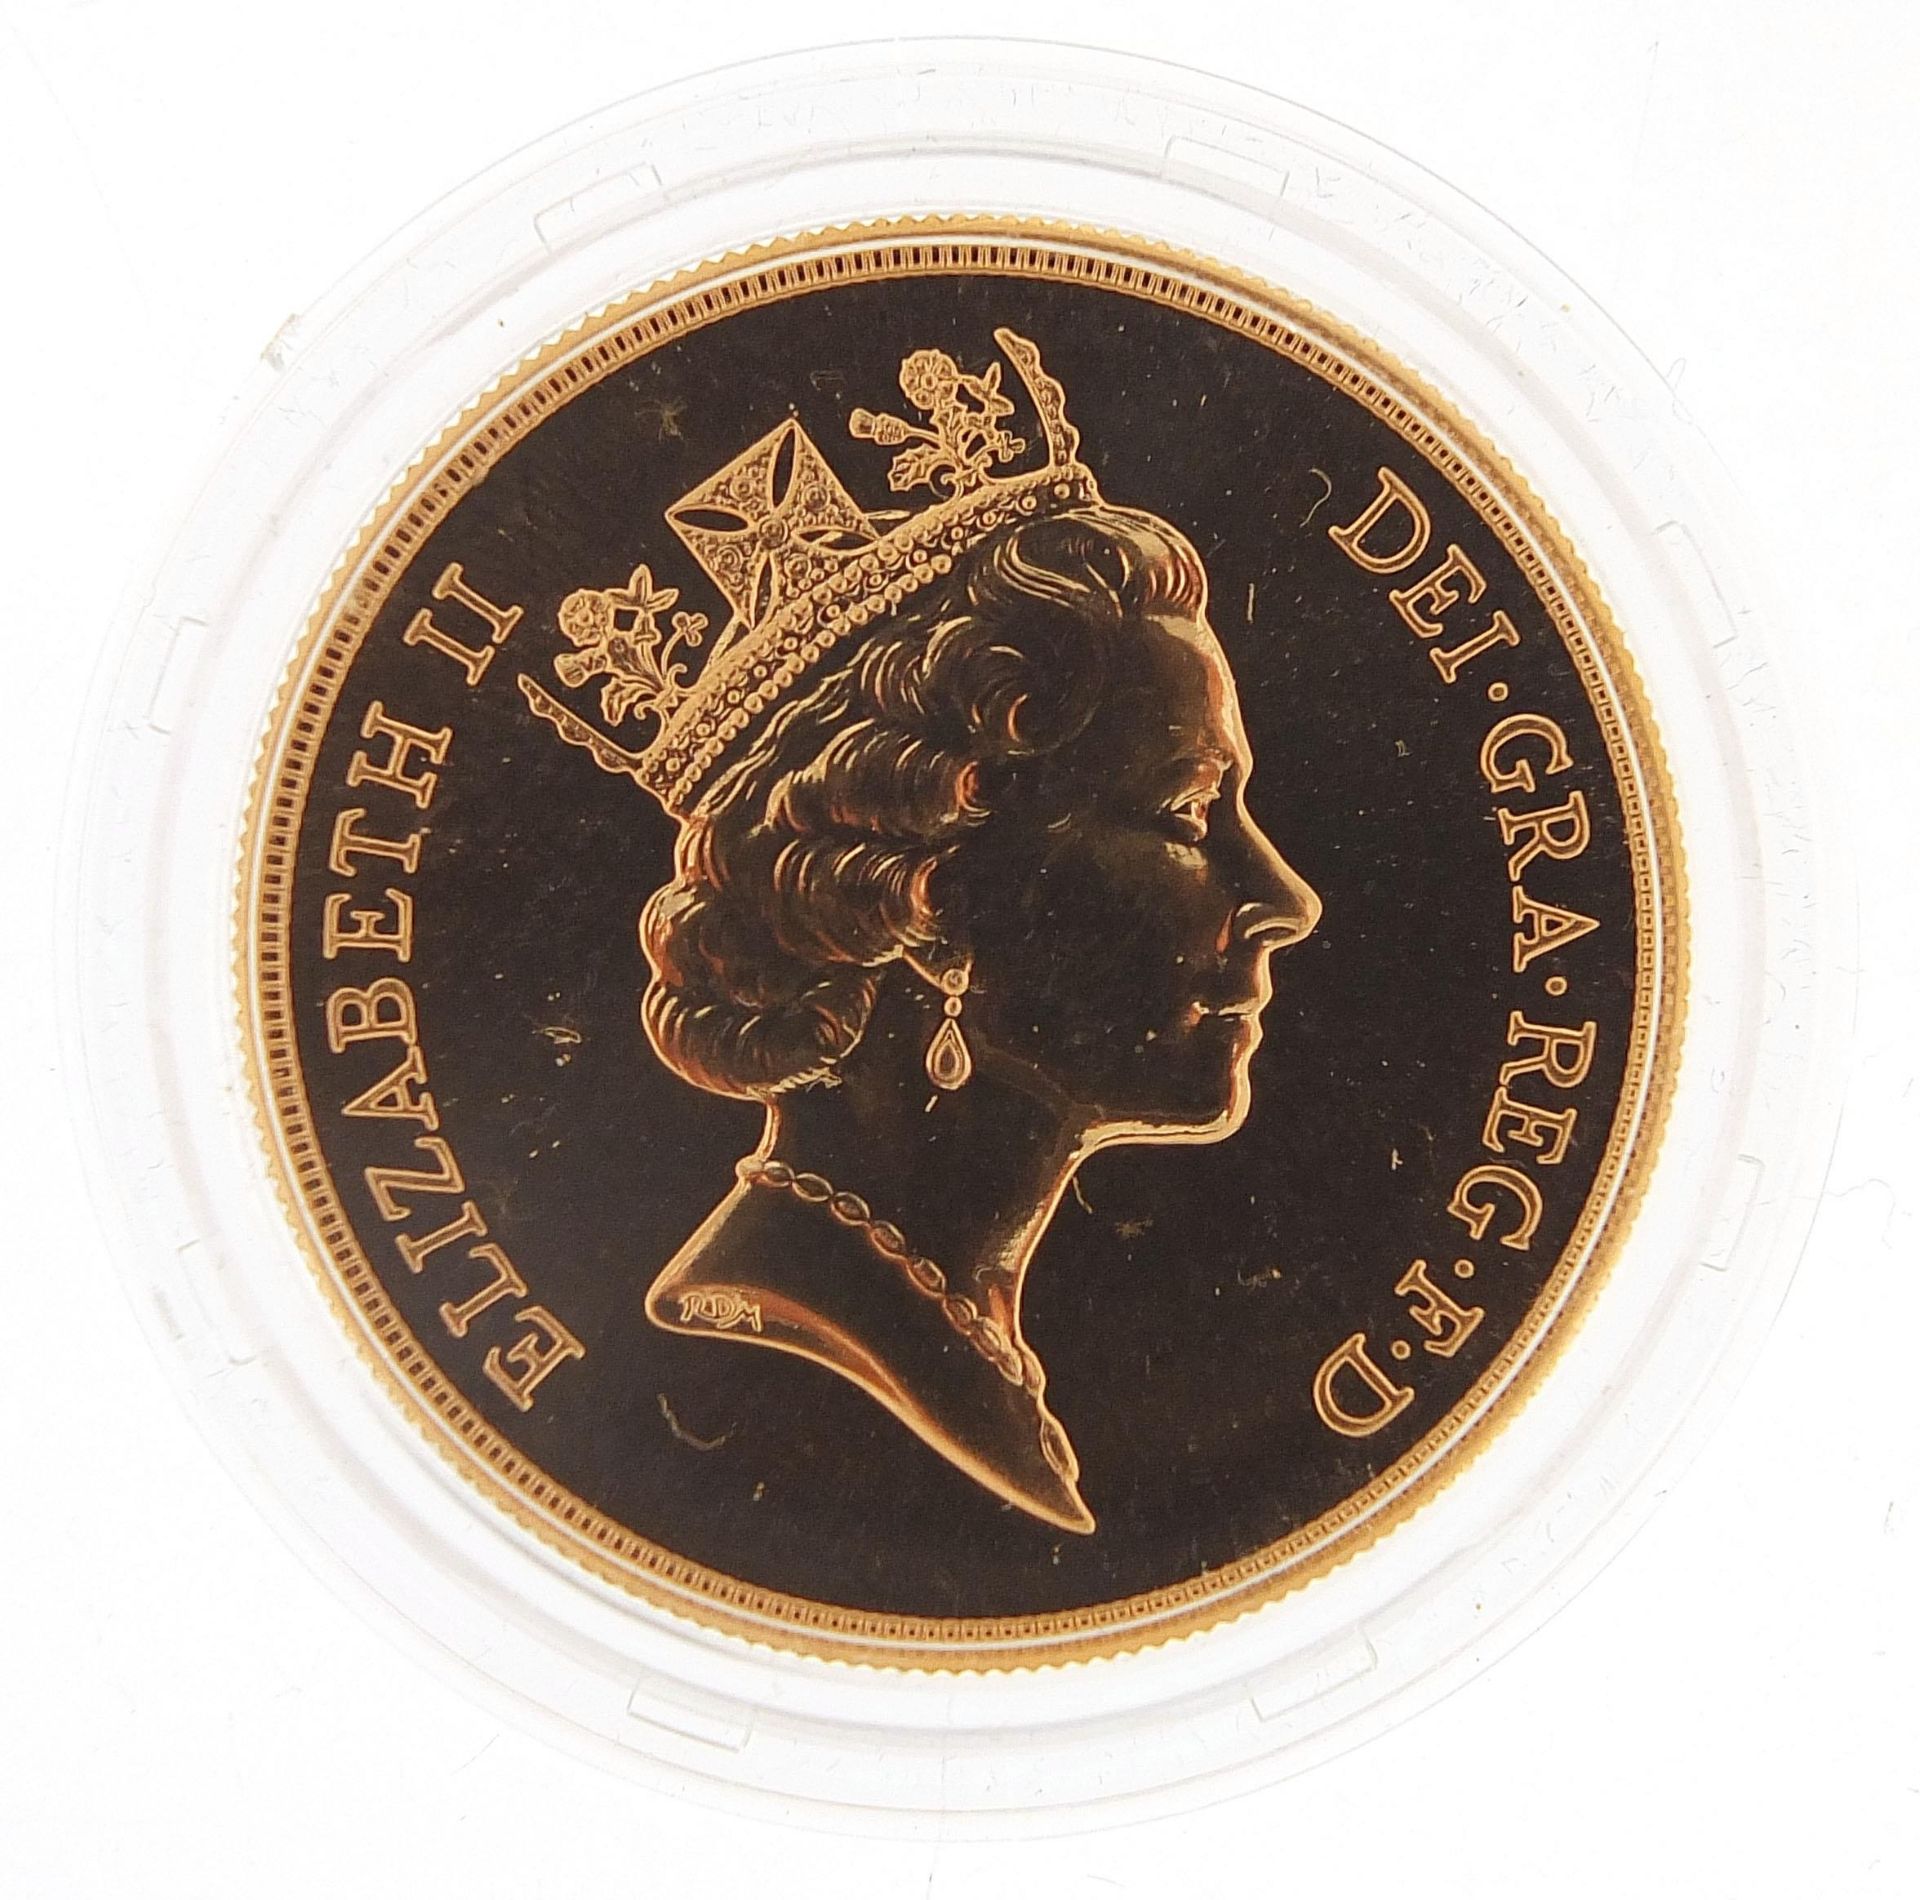 Elizabeth II 1993 uncirculated gold five pound coin with box and certificate numbered 741 - this lot - Image 2 of 6